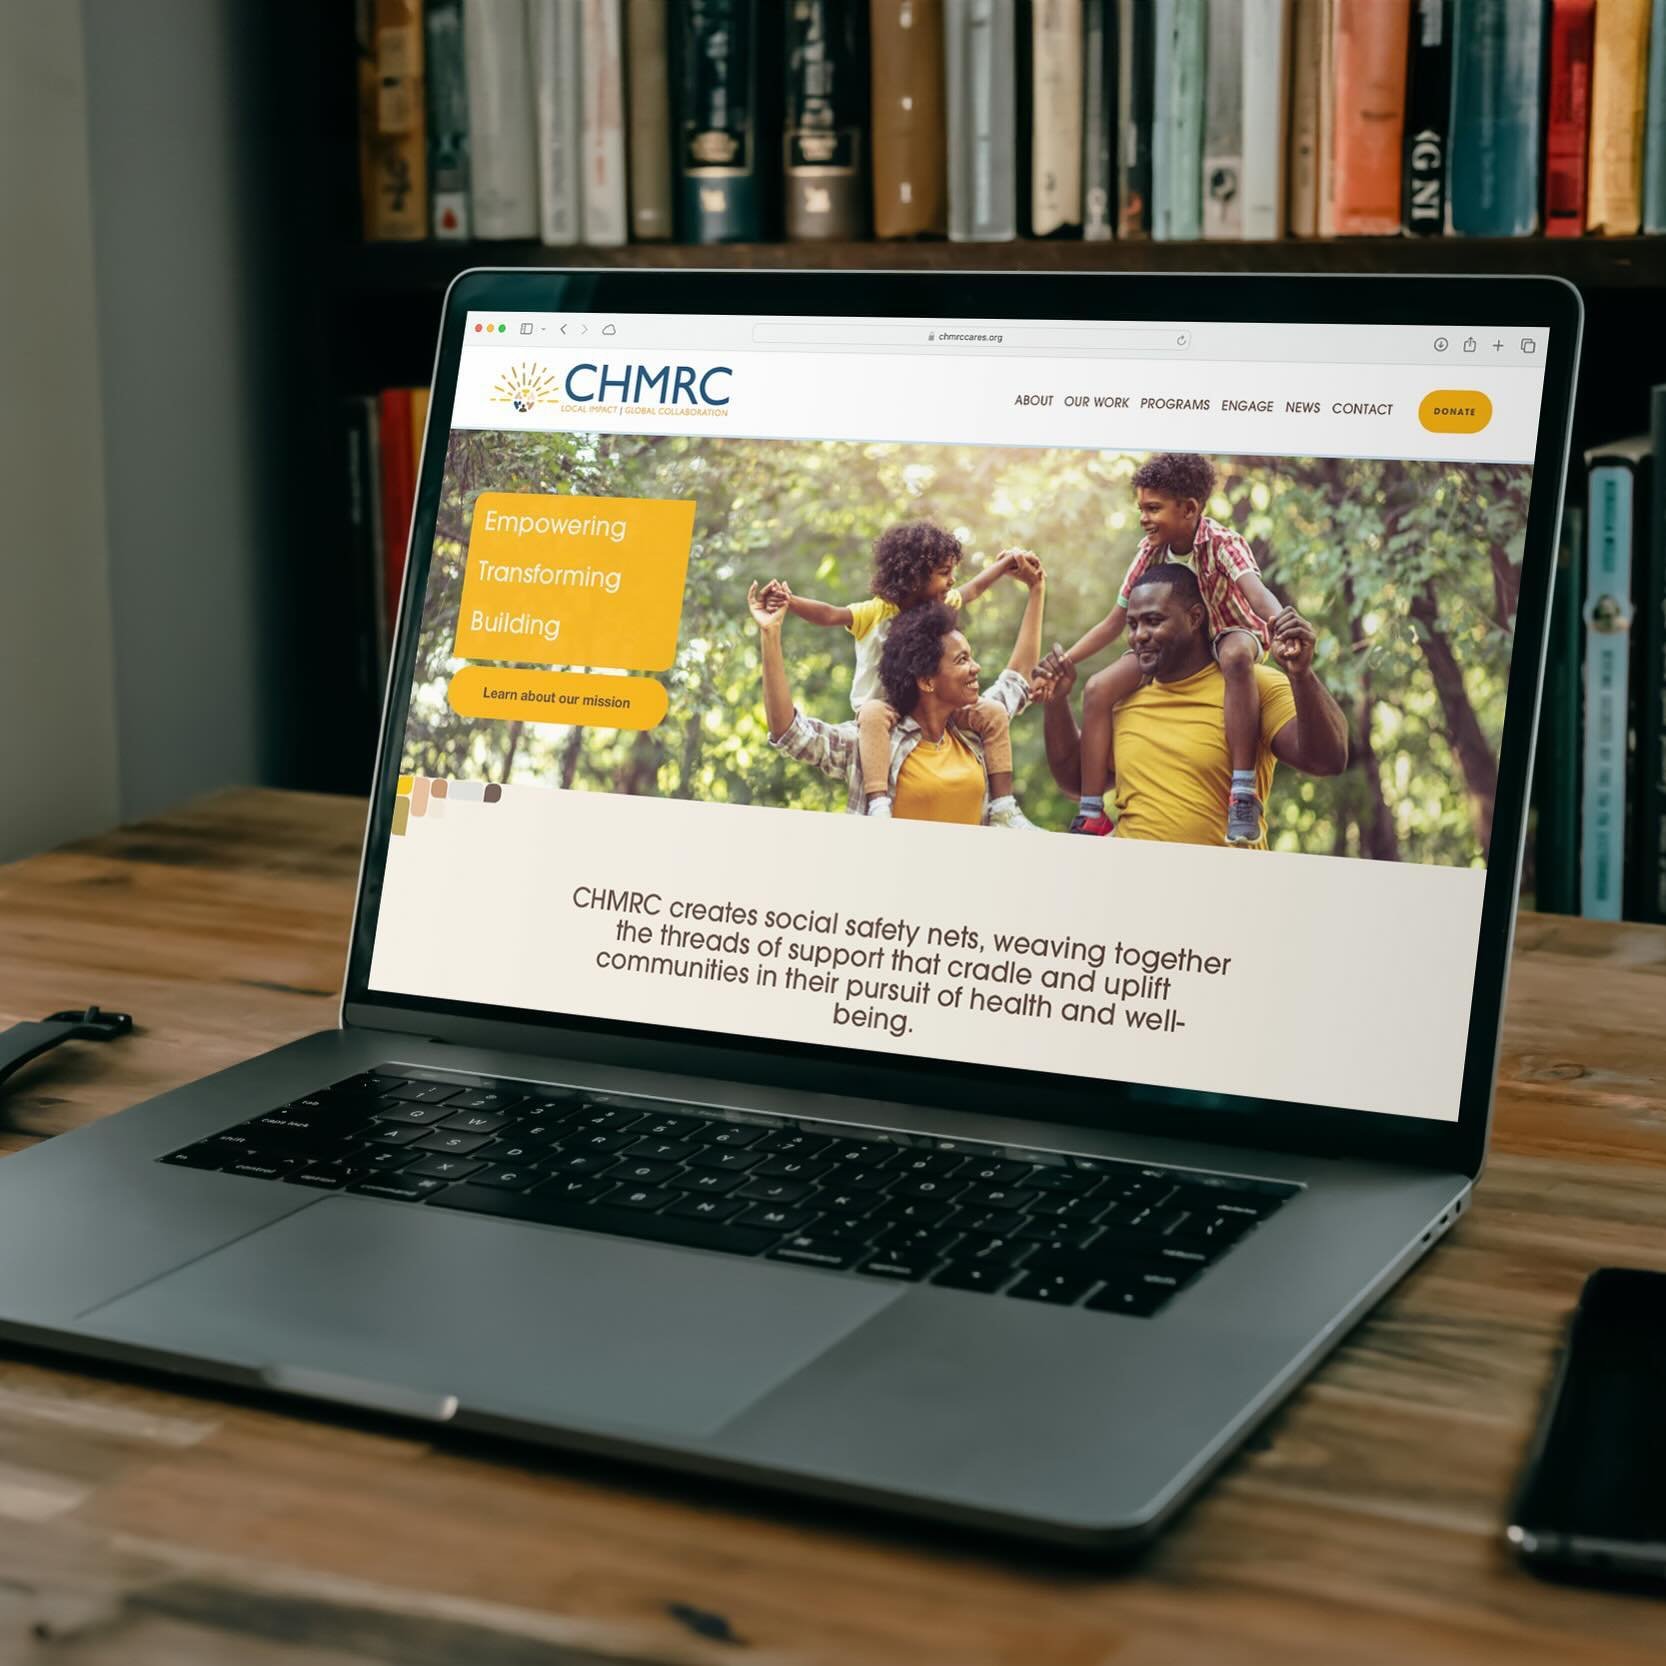 Mazzarello Media + Arts is proud to announce the CHMRC launch of its redesigned website. CHMRC is a leading nonprofit dedicated to community resilience and public health. Packed with new features, the site aims to provide visitors with valuable resou